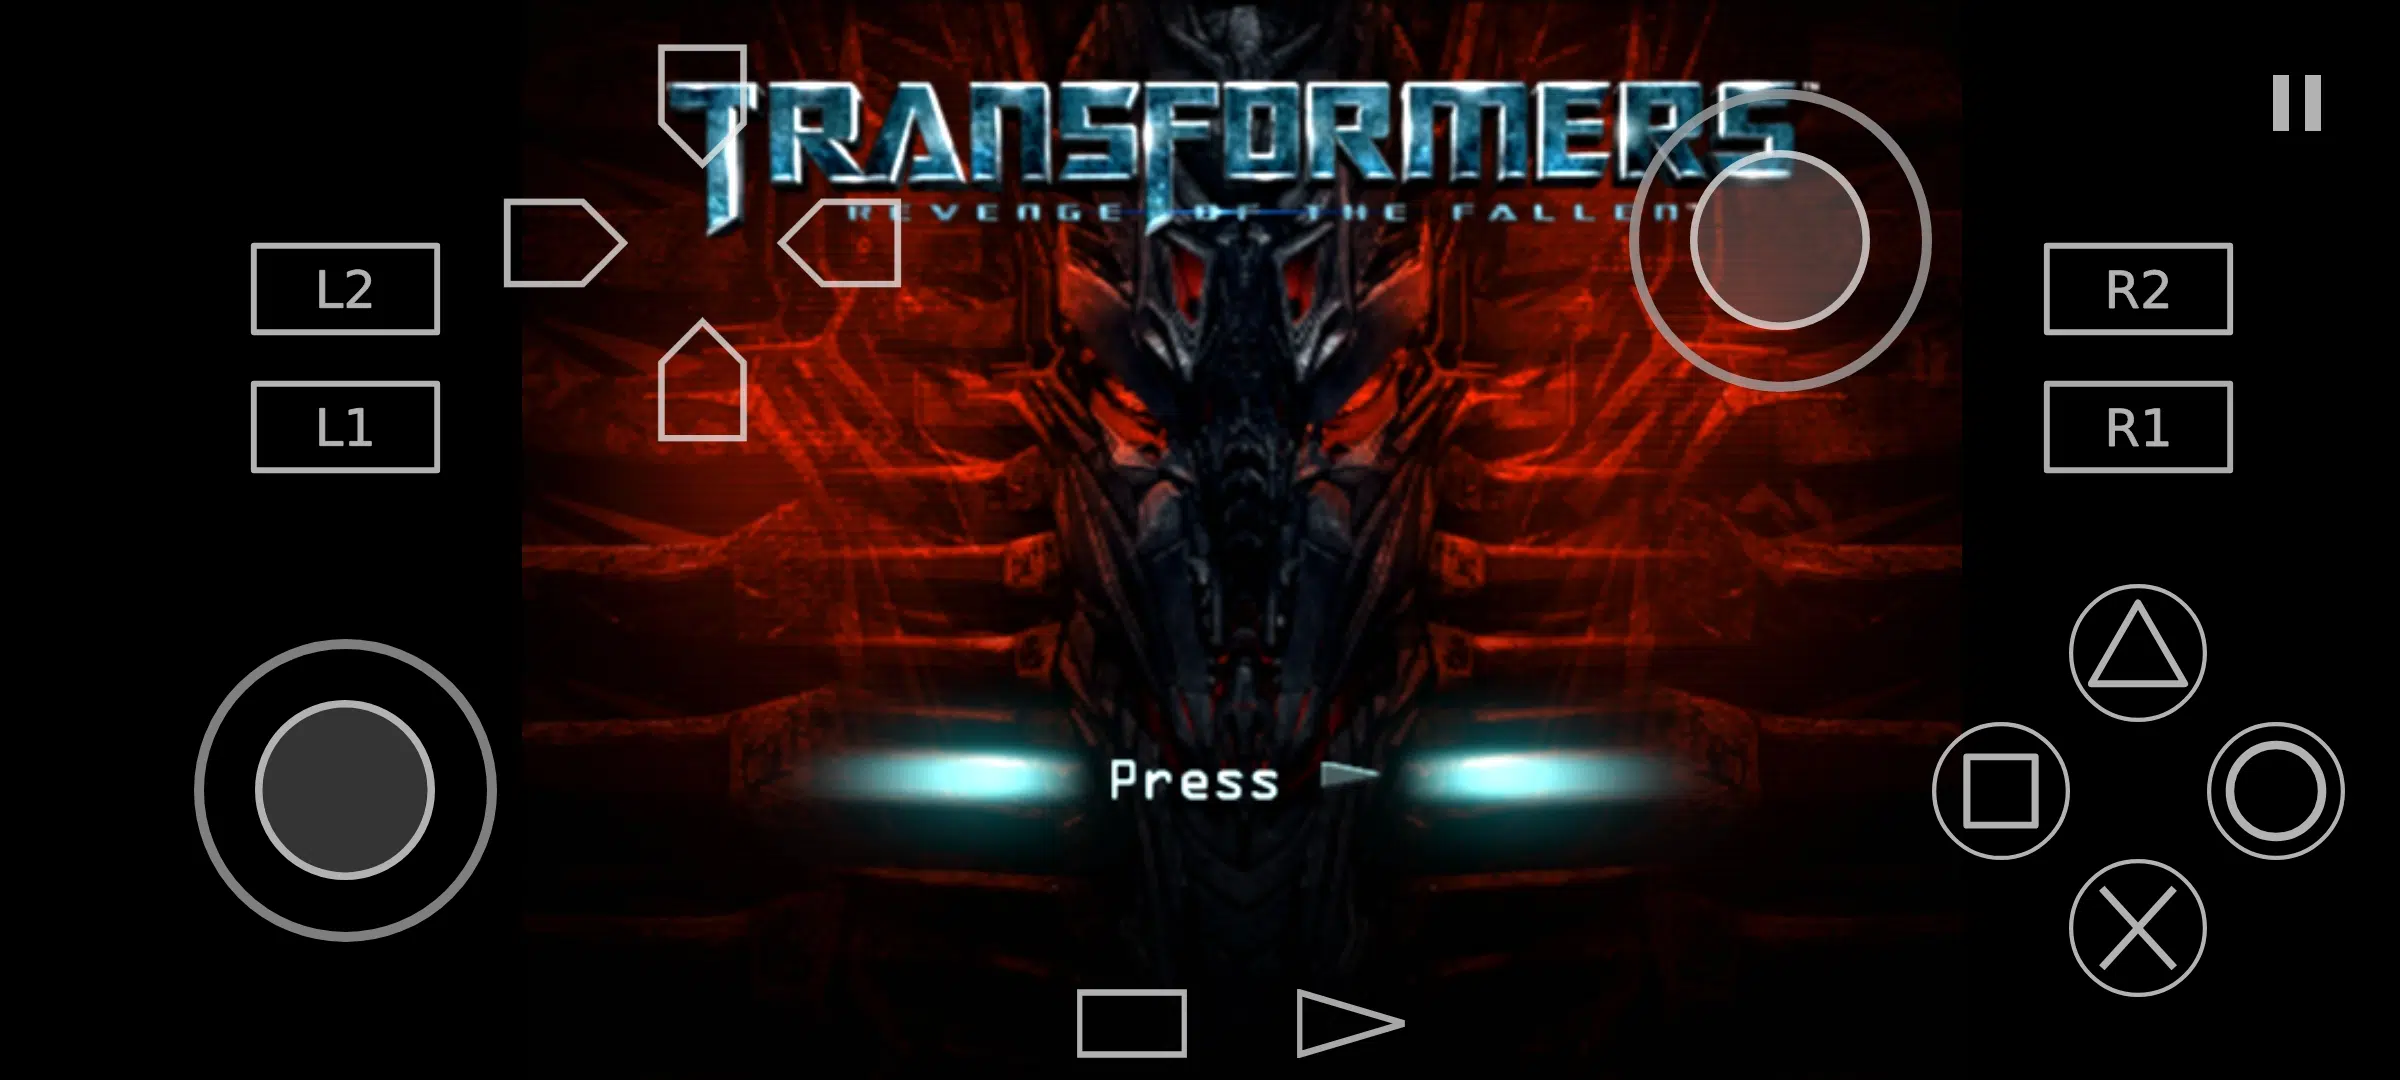 Transformers Revenge of the Fallen Game Télécharger Android APK - AetherSX2 Ps2 Emulator